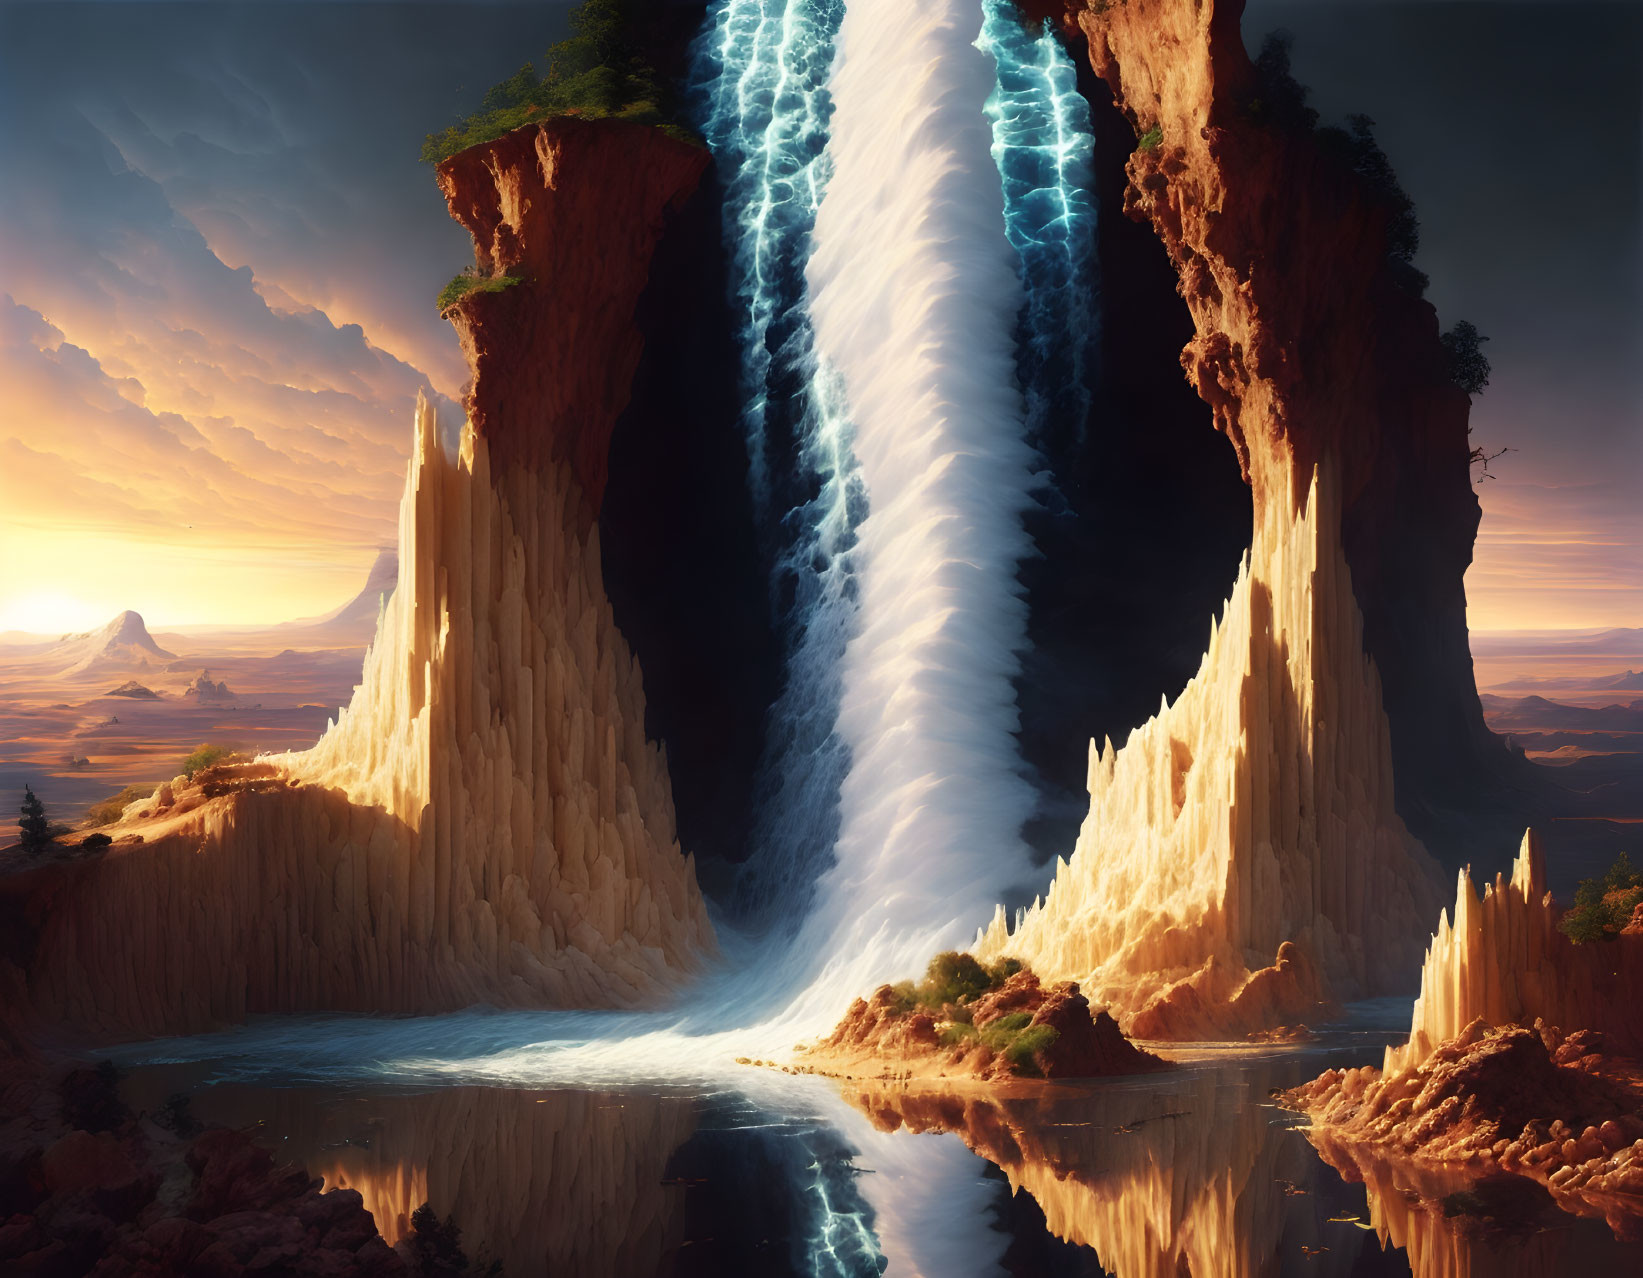 Majestic waterfall between towering cliffs at golden sunset